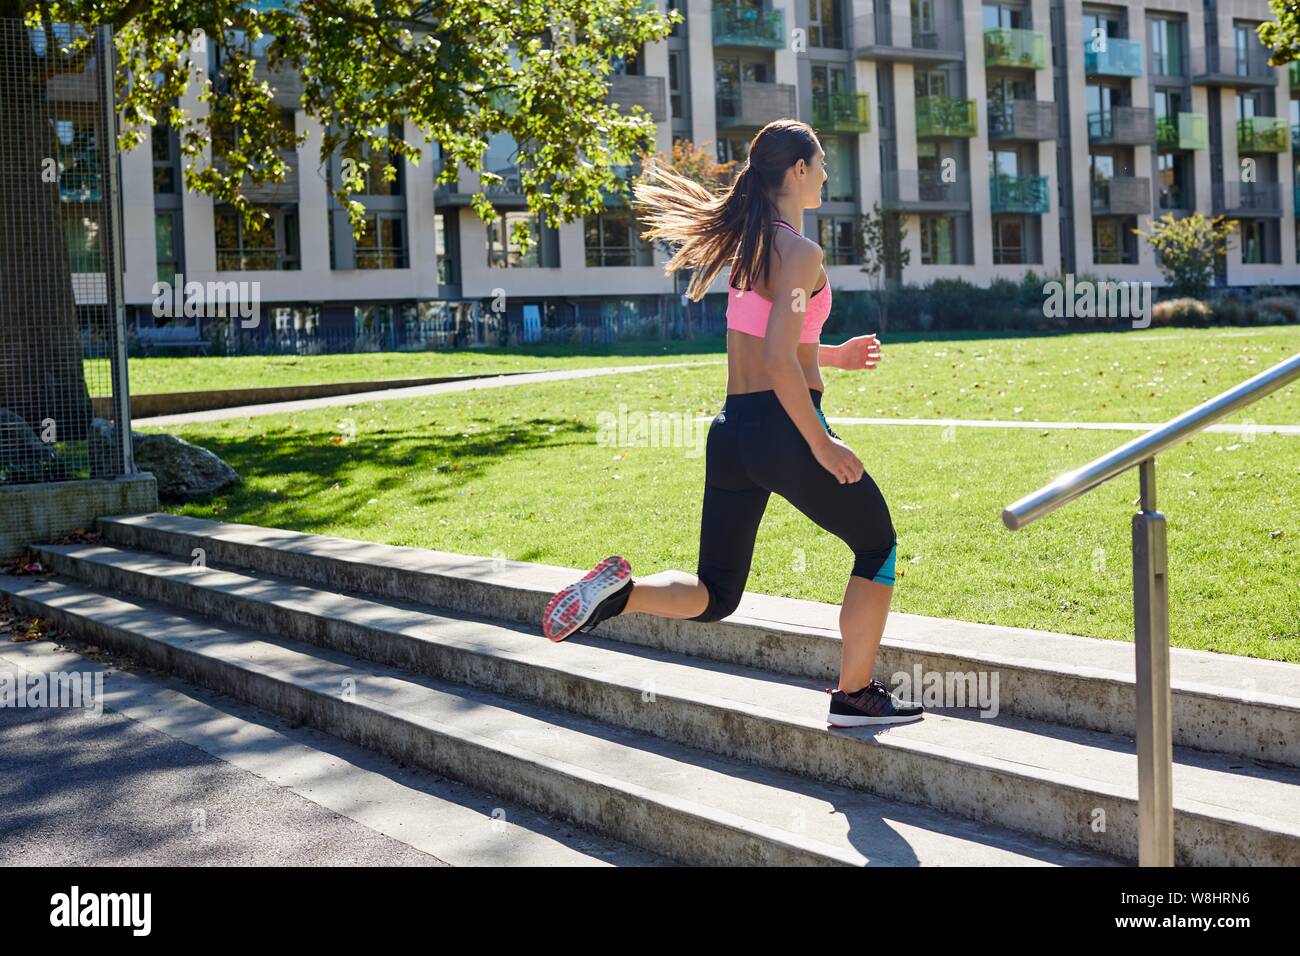 Young woman jogging up steps. Stock Photo